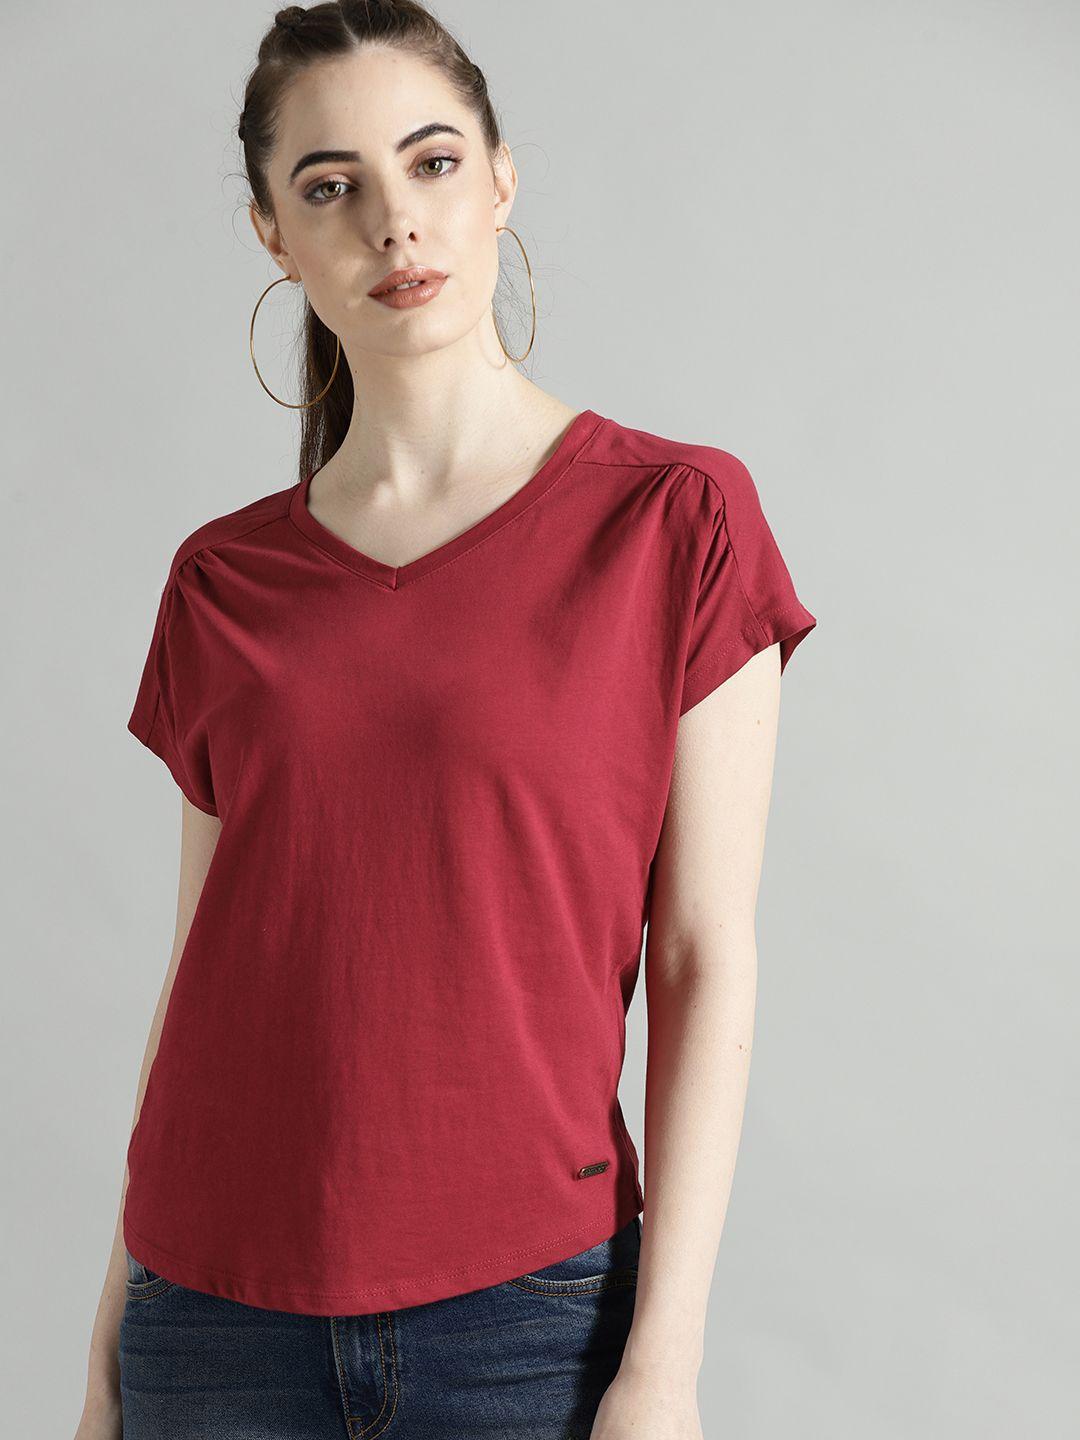 roadster-women-red-solid-t-shirt